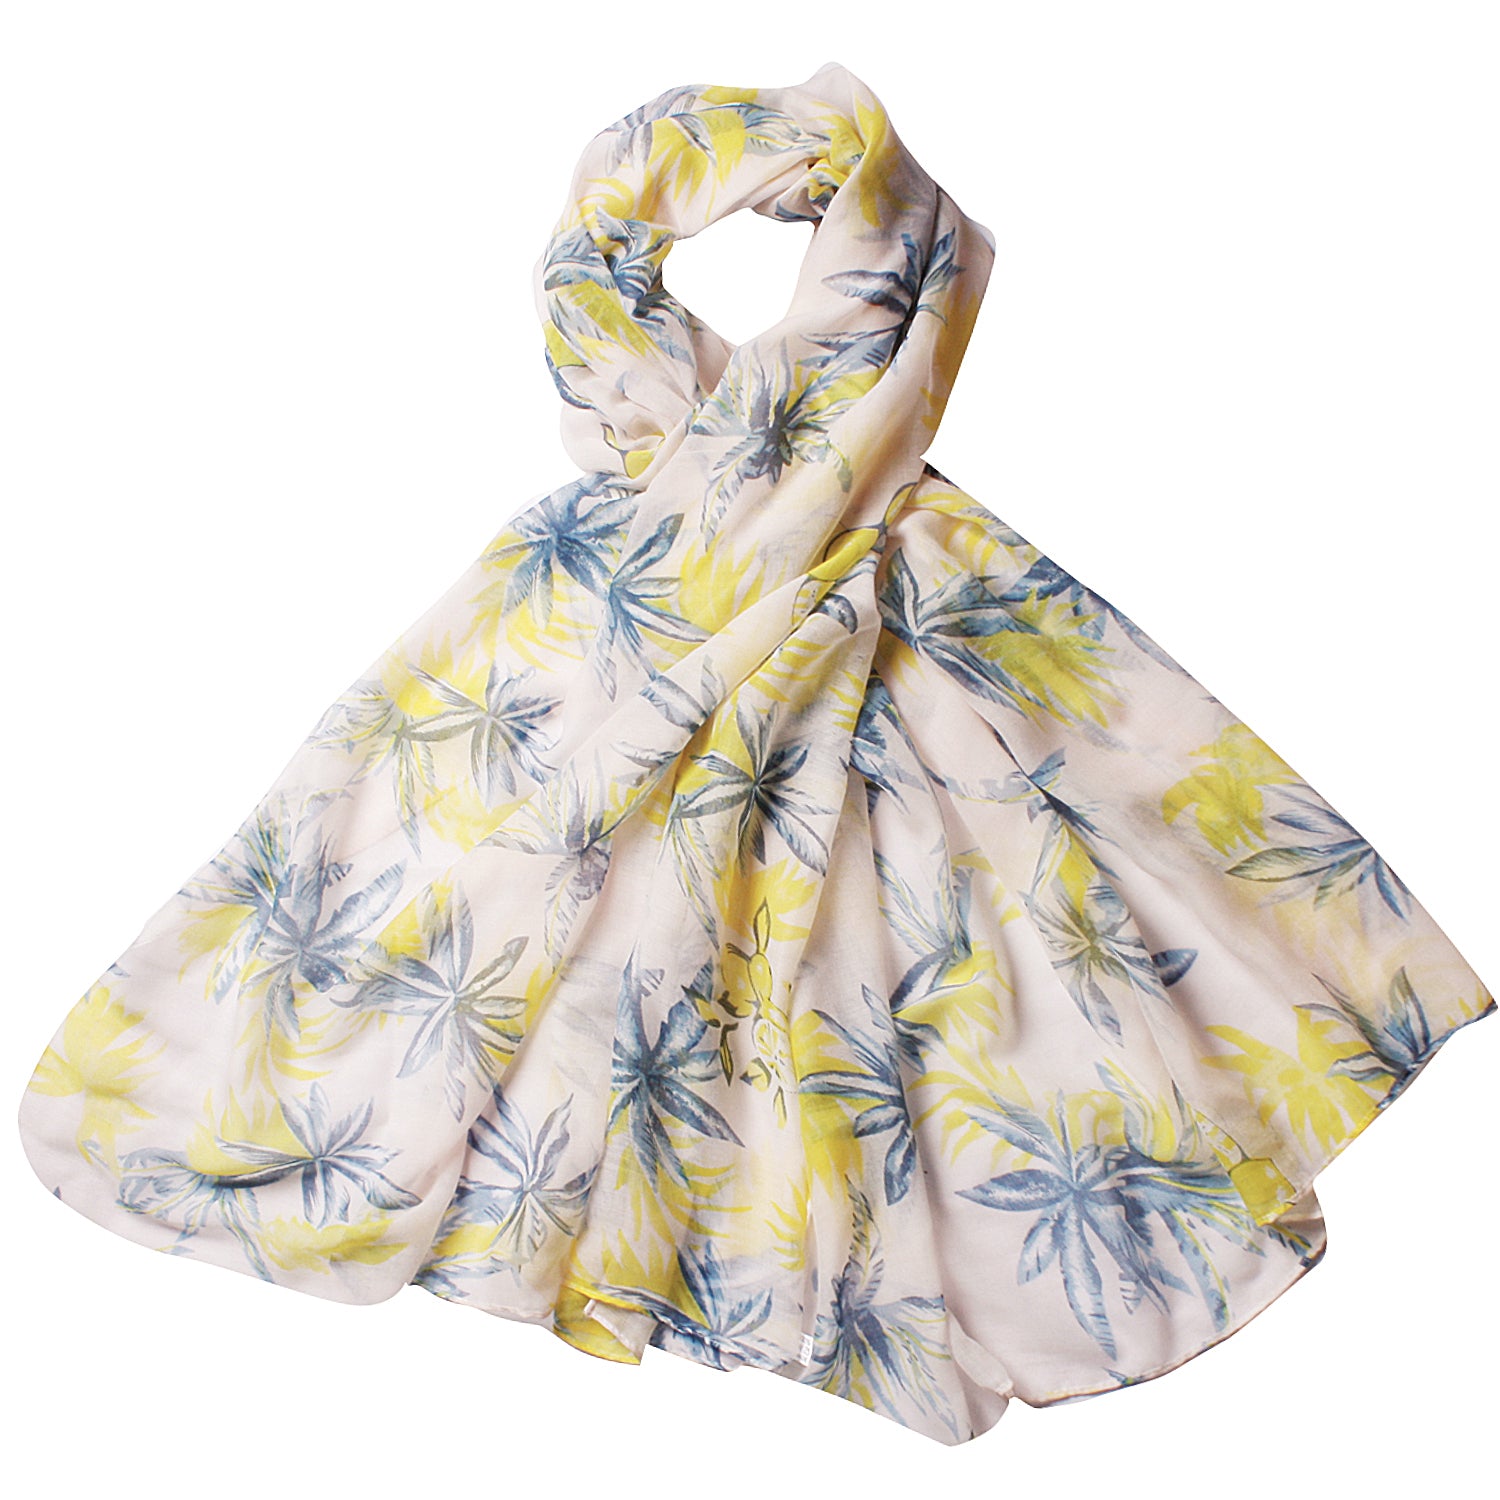 Women Lightweight Scarves Shawl Wraps with Floral Print for Spring Fall Holiday-EvridWearUS